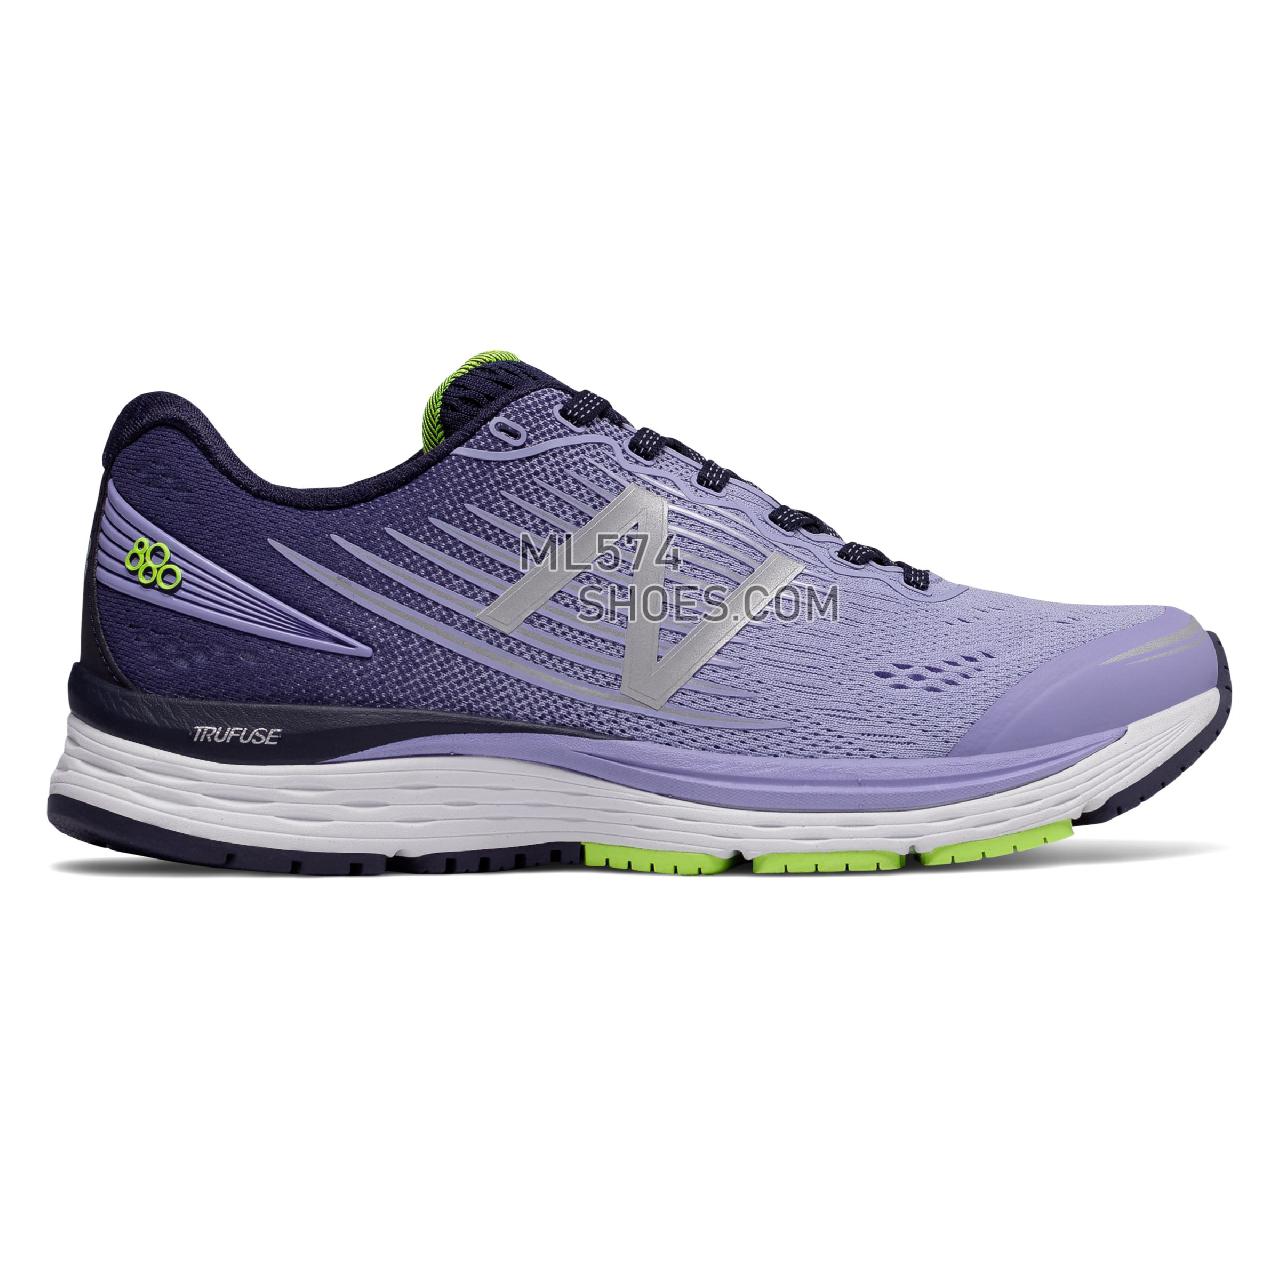 New Balance 880v8 - Women's 880 - Running Blue Iris with Pigment and Solar Yellow - W880BY8